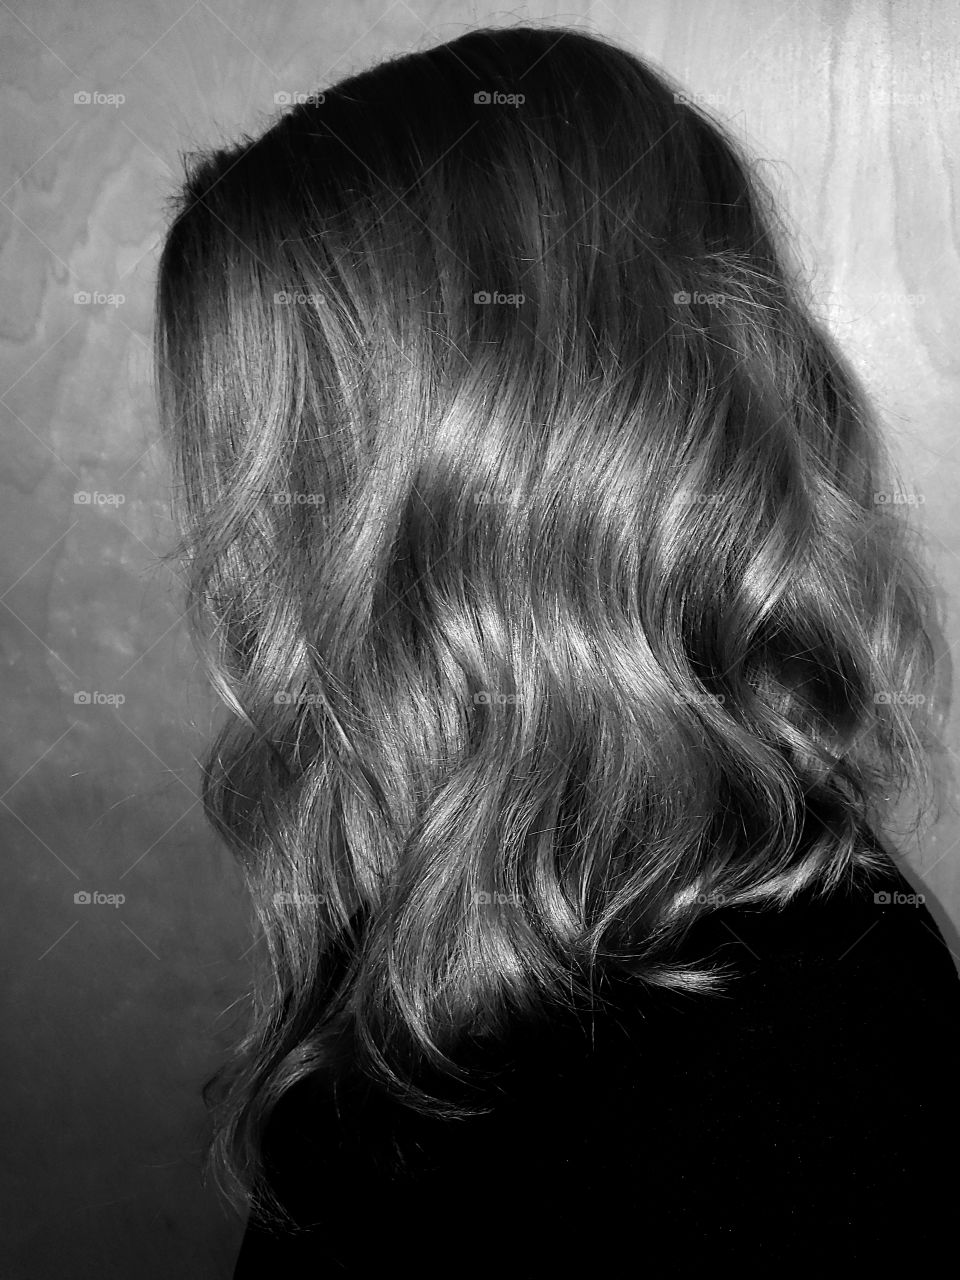 Black and white side portrait of hair, silhouette